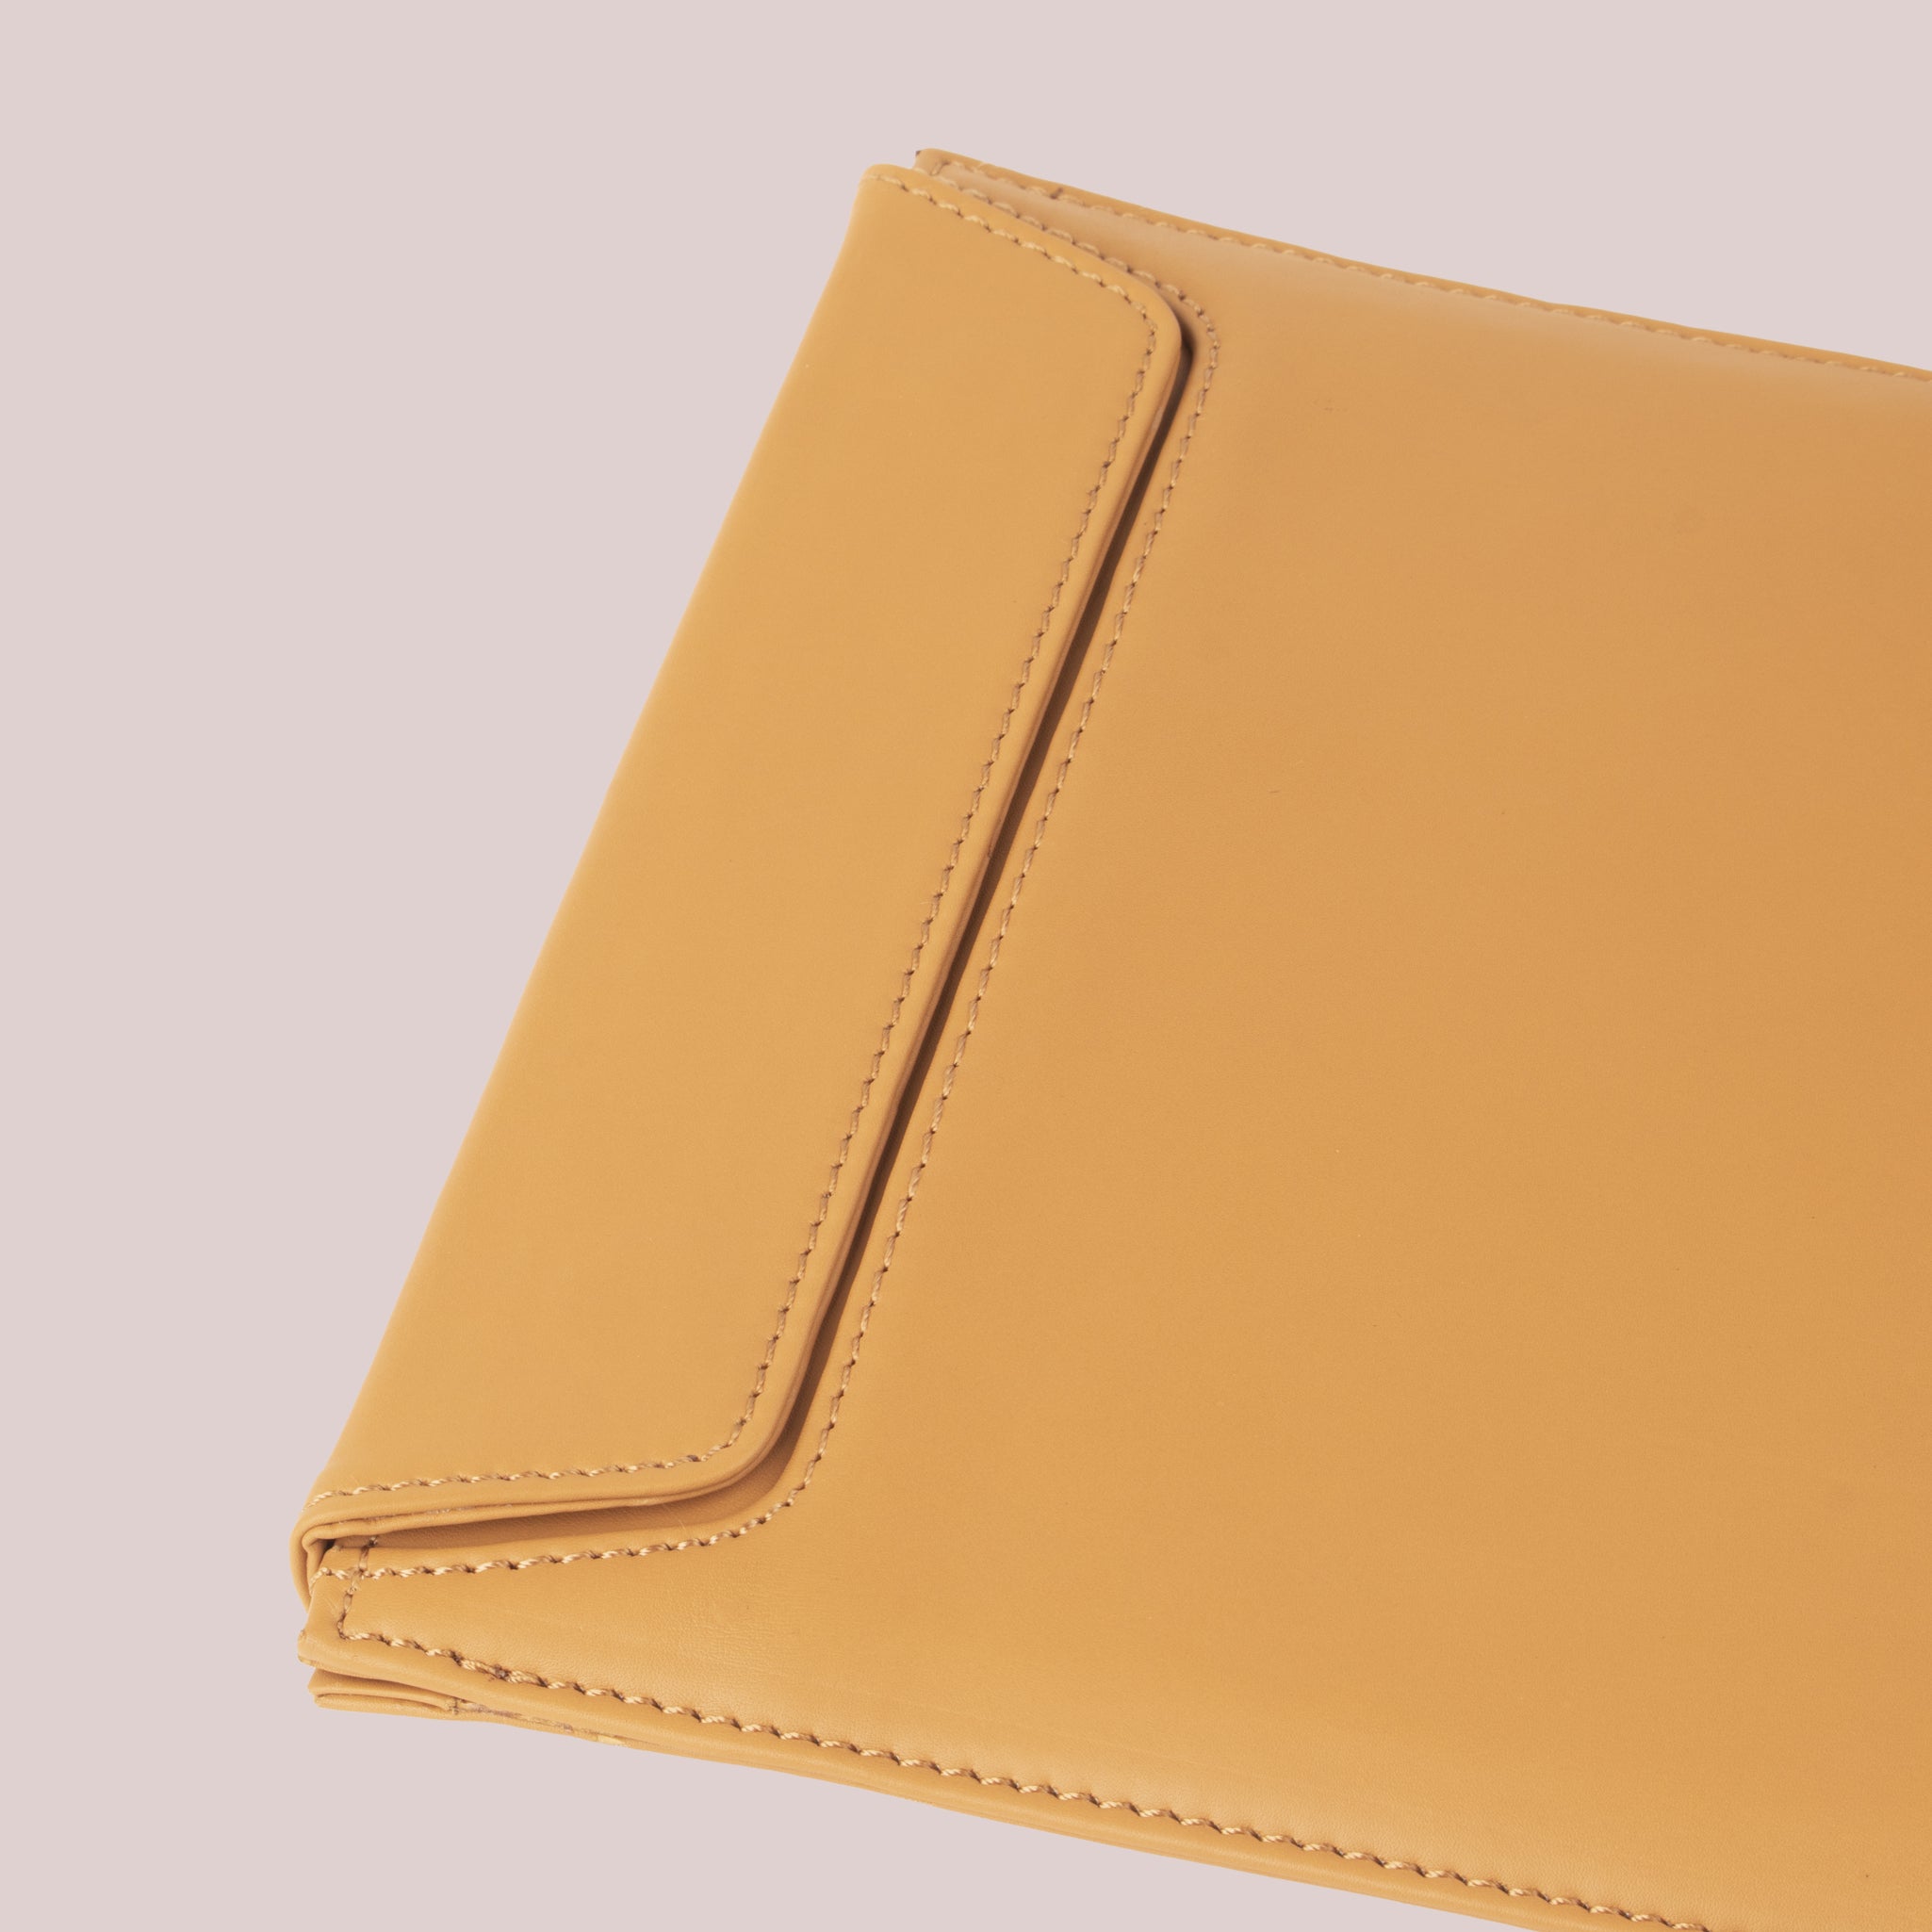 Buy Yellow leather sleeve for Macbook online